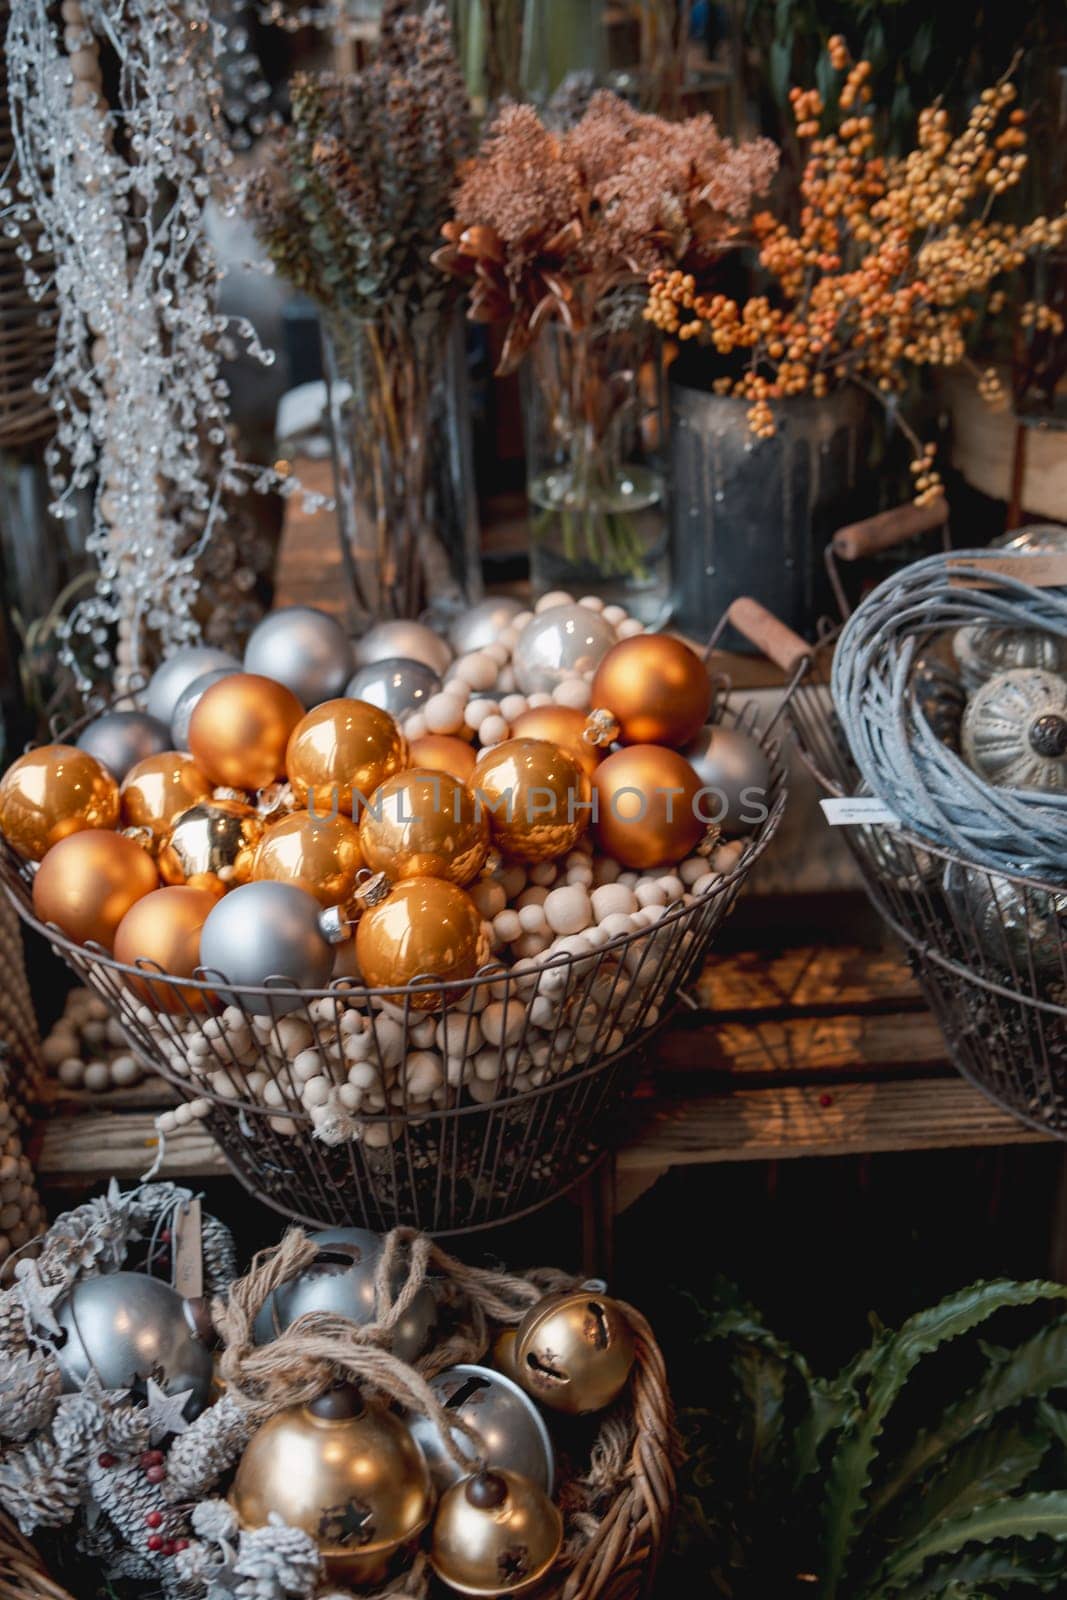 A rich assortment of New Year's decor available at the decor store. by teksomolika